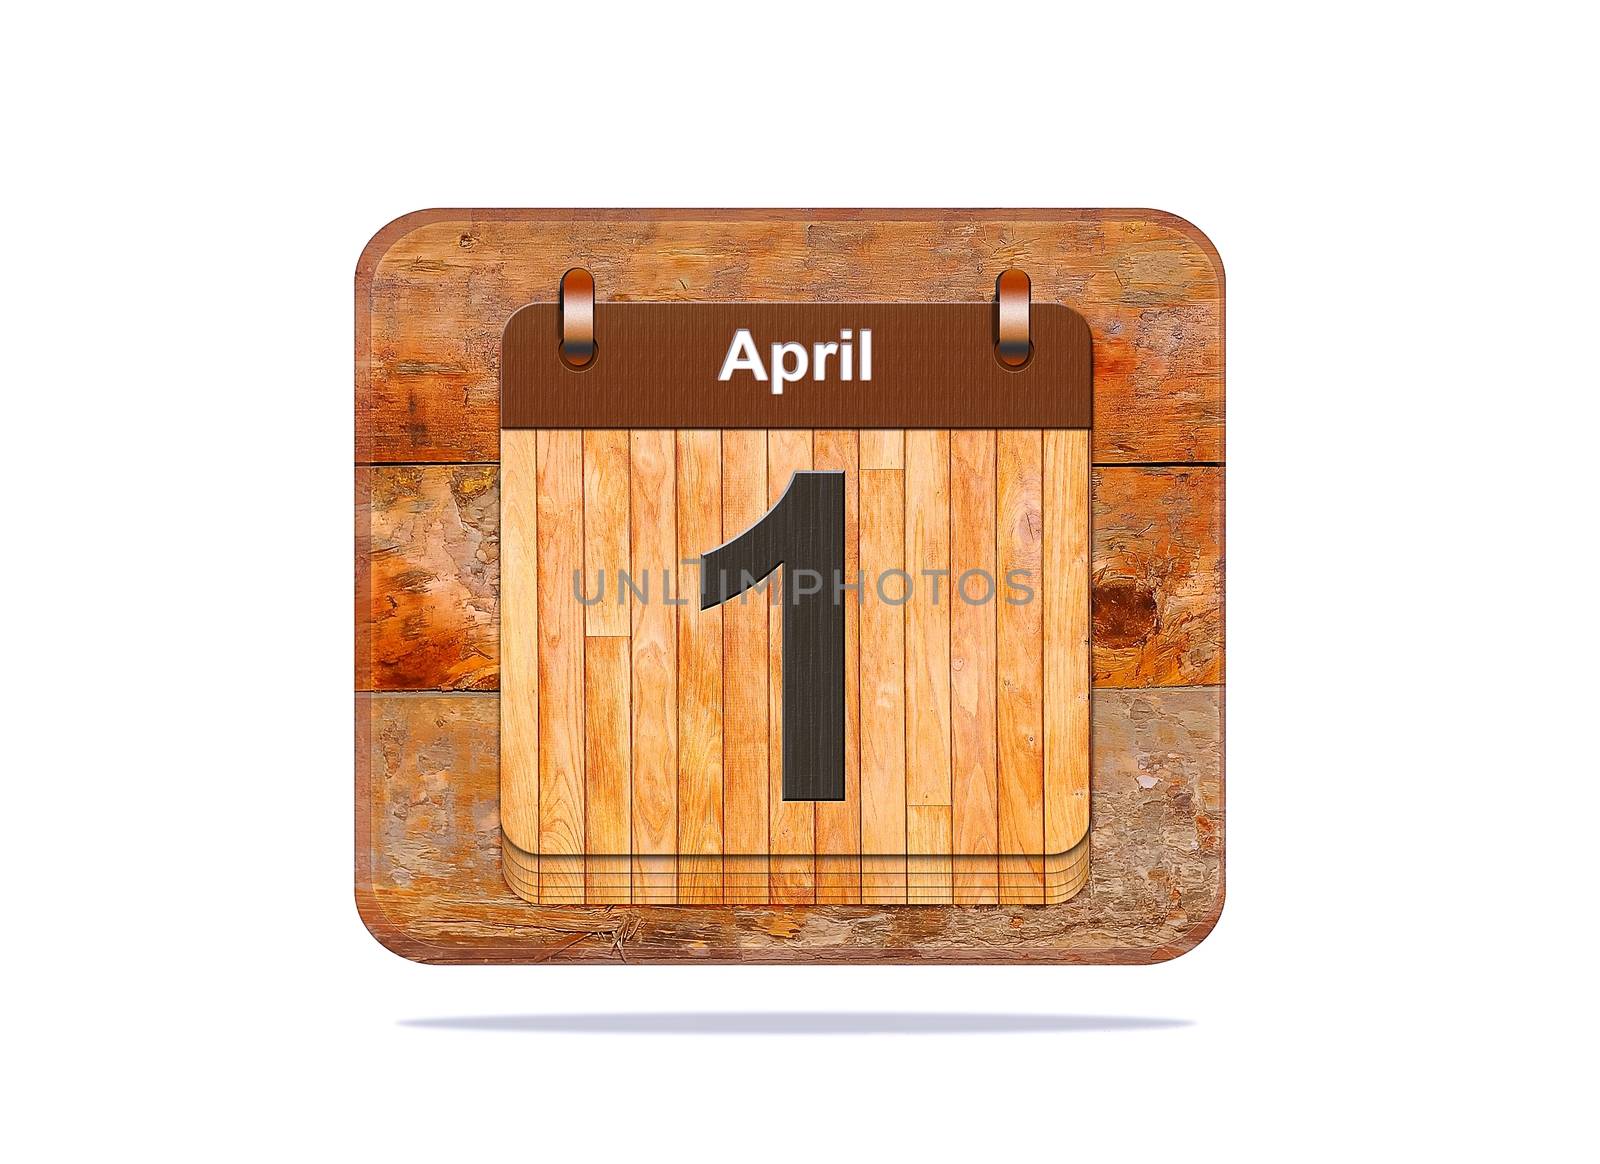 Calendar with the date of April 1.